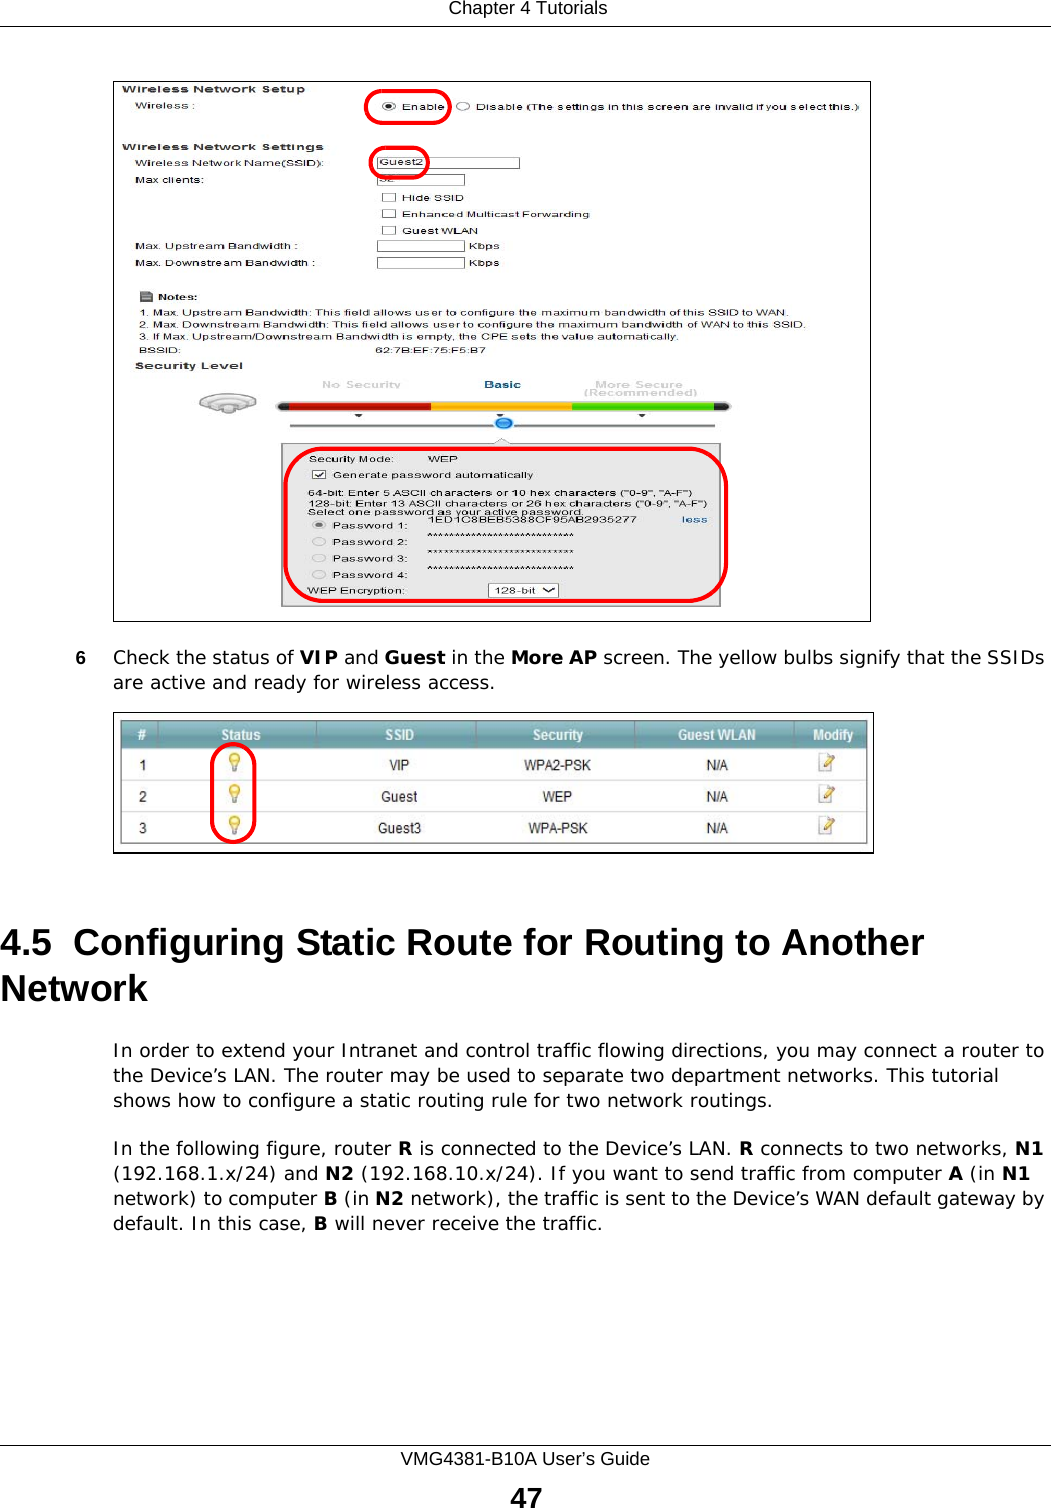  Chapter 4 TutorialsVMG4381-B10A User’s Guide476Check the status of VIP and Guest in the More AP screen. The yellow bulbs signify that the SSIDs are active and ready for wireless access. 4.5  Configuring Static Route for Routing to Another NetworkIn order to extend your Intranet and control traffic flowing directions, you may connect a router to the Device’s LAN. The router may be used to separate two department networks. This tutorial shows how to configure a static routing rule for two network routings.In the following figure, router R is connected to the Device’s LAN. R connects to two networks, N1 (192.168.1.x/24) and N2 (192.168.10.x/24). If you want to send traffic from computer A (in N1 network) to computer B (in N2 network), the traffic is sent to the Device’s WAN default gateway by default. In this case, B will never receive the traffic.